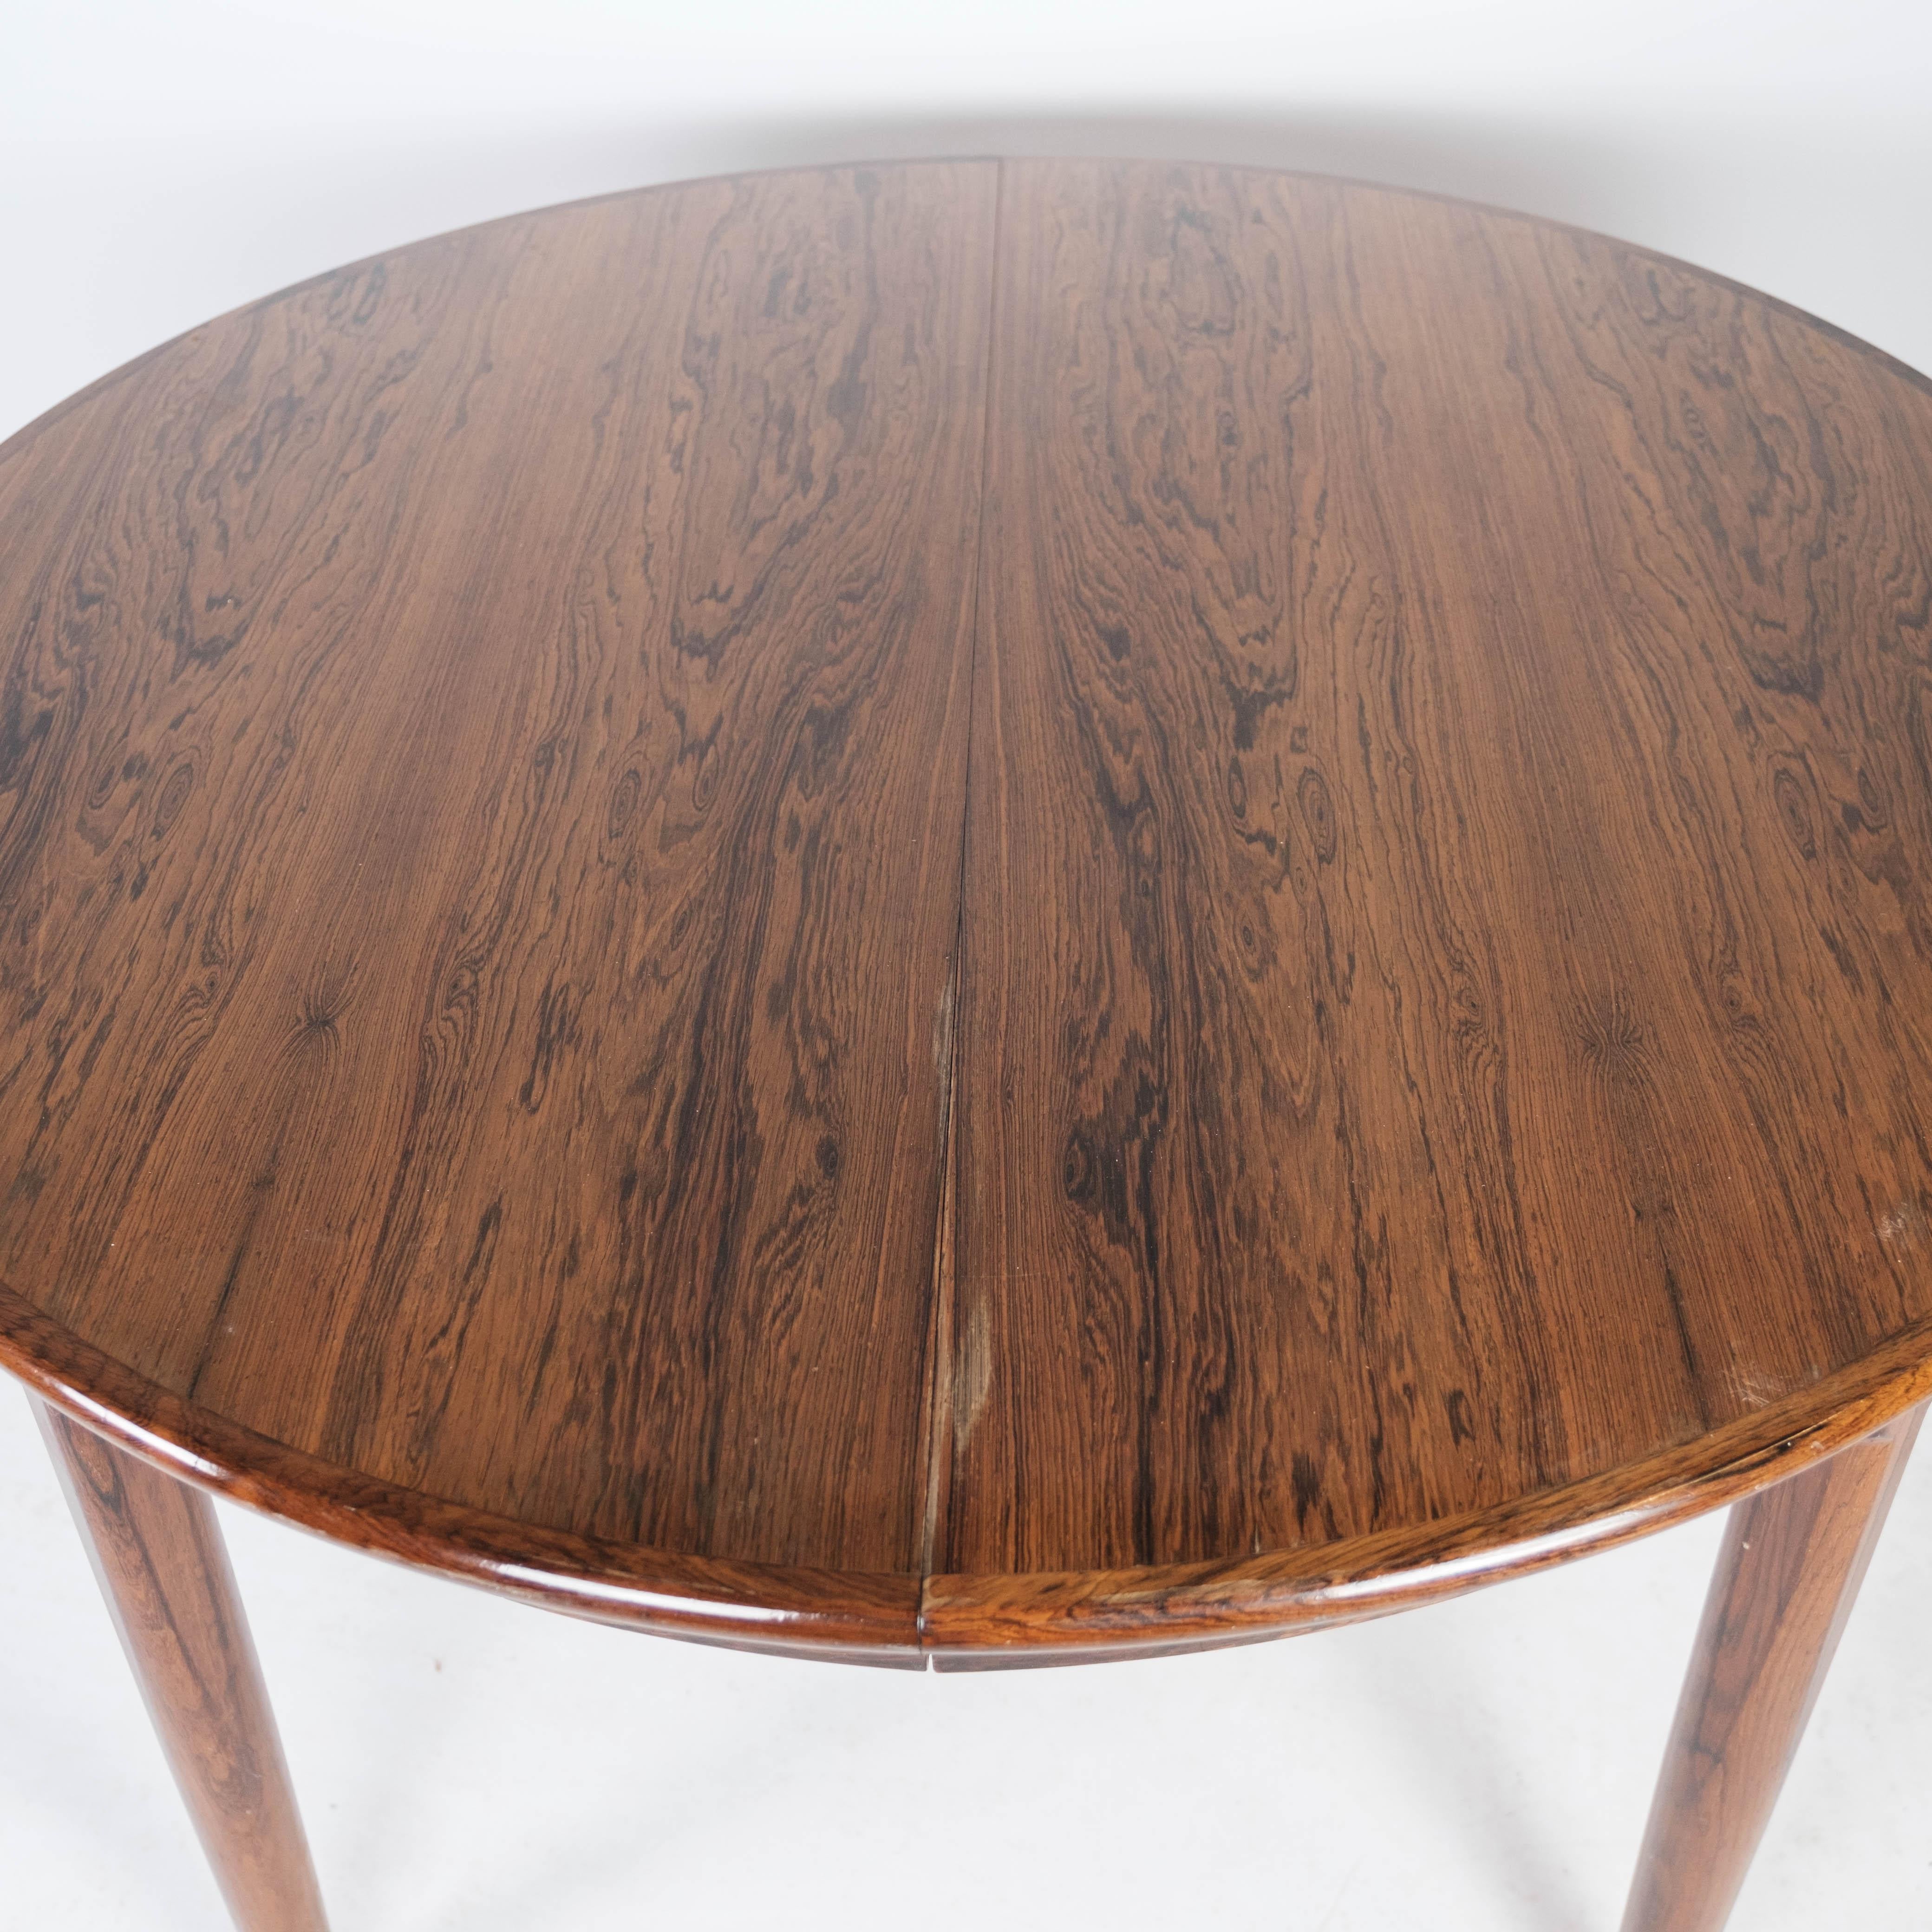 Mid-Century Modern Dining Table Made In Rosewood With Extension, Danish Design From 1960s For Sale